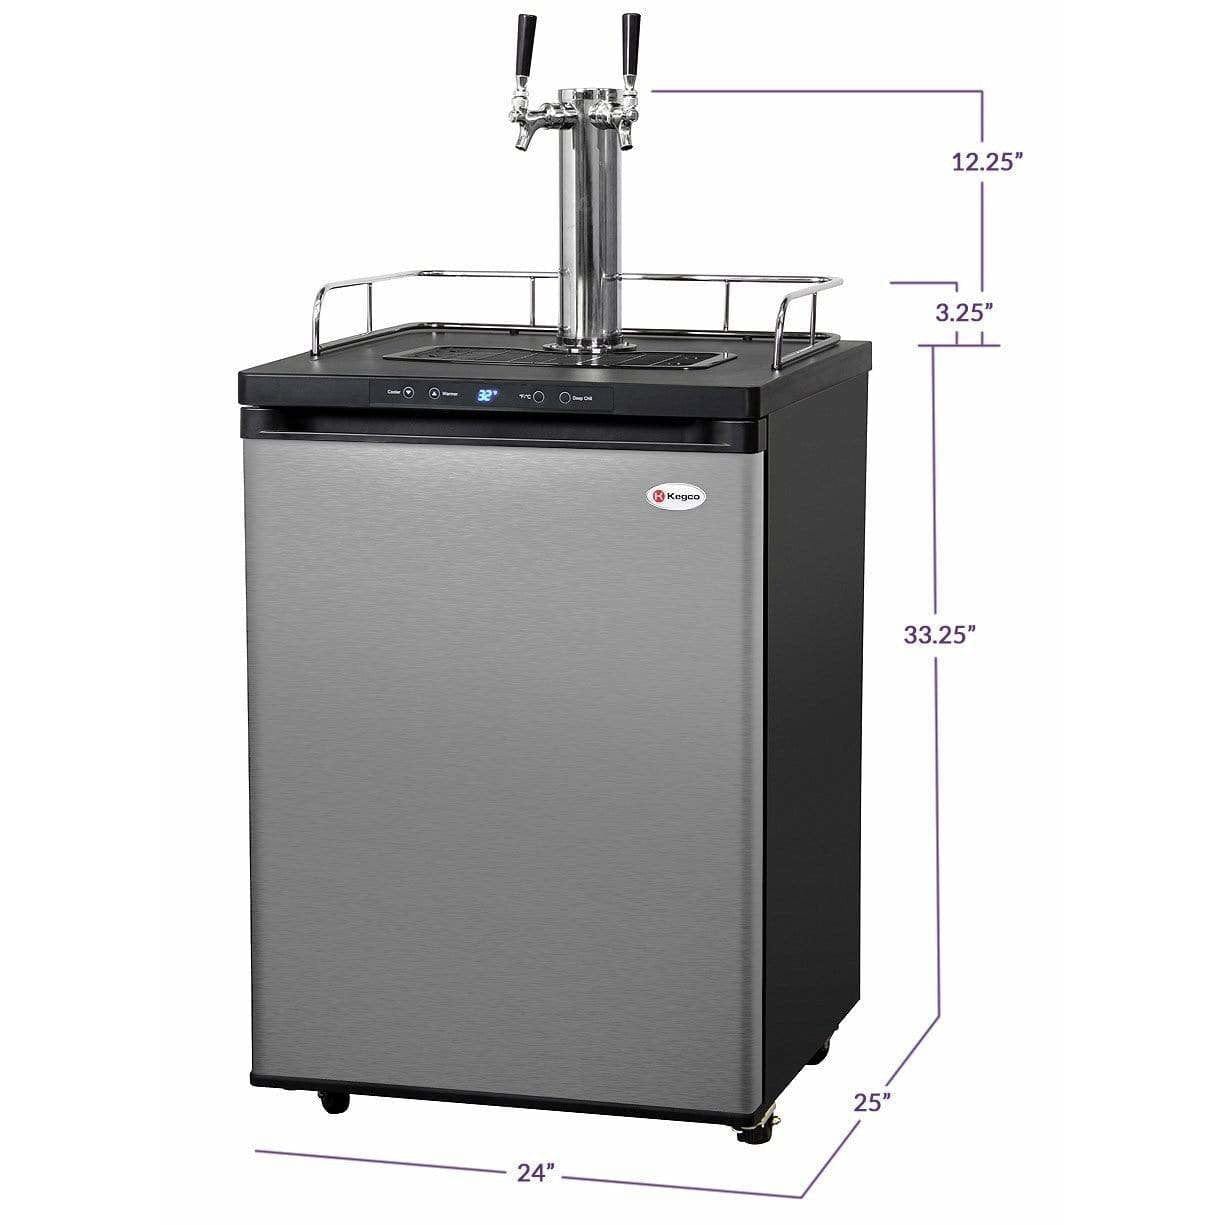 Kegco 24" Wide Dual Tap Stainless Steel Digital Home Brew Kegerator HBK309S-2 Wine Coolers Empire